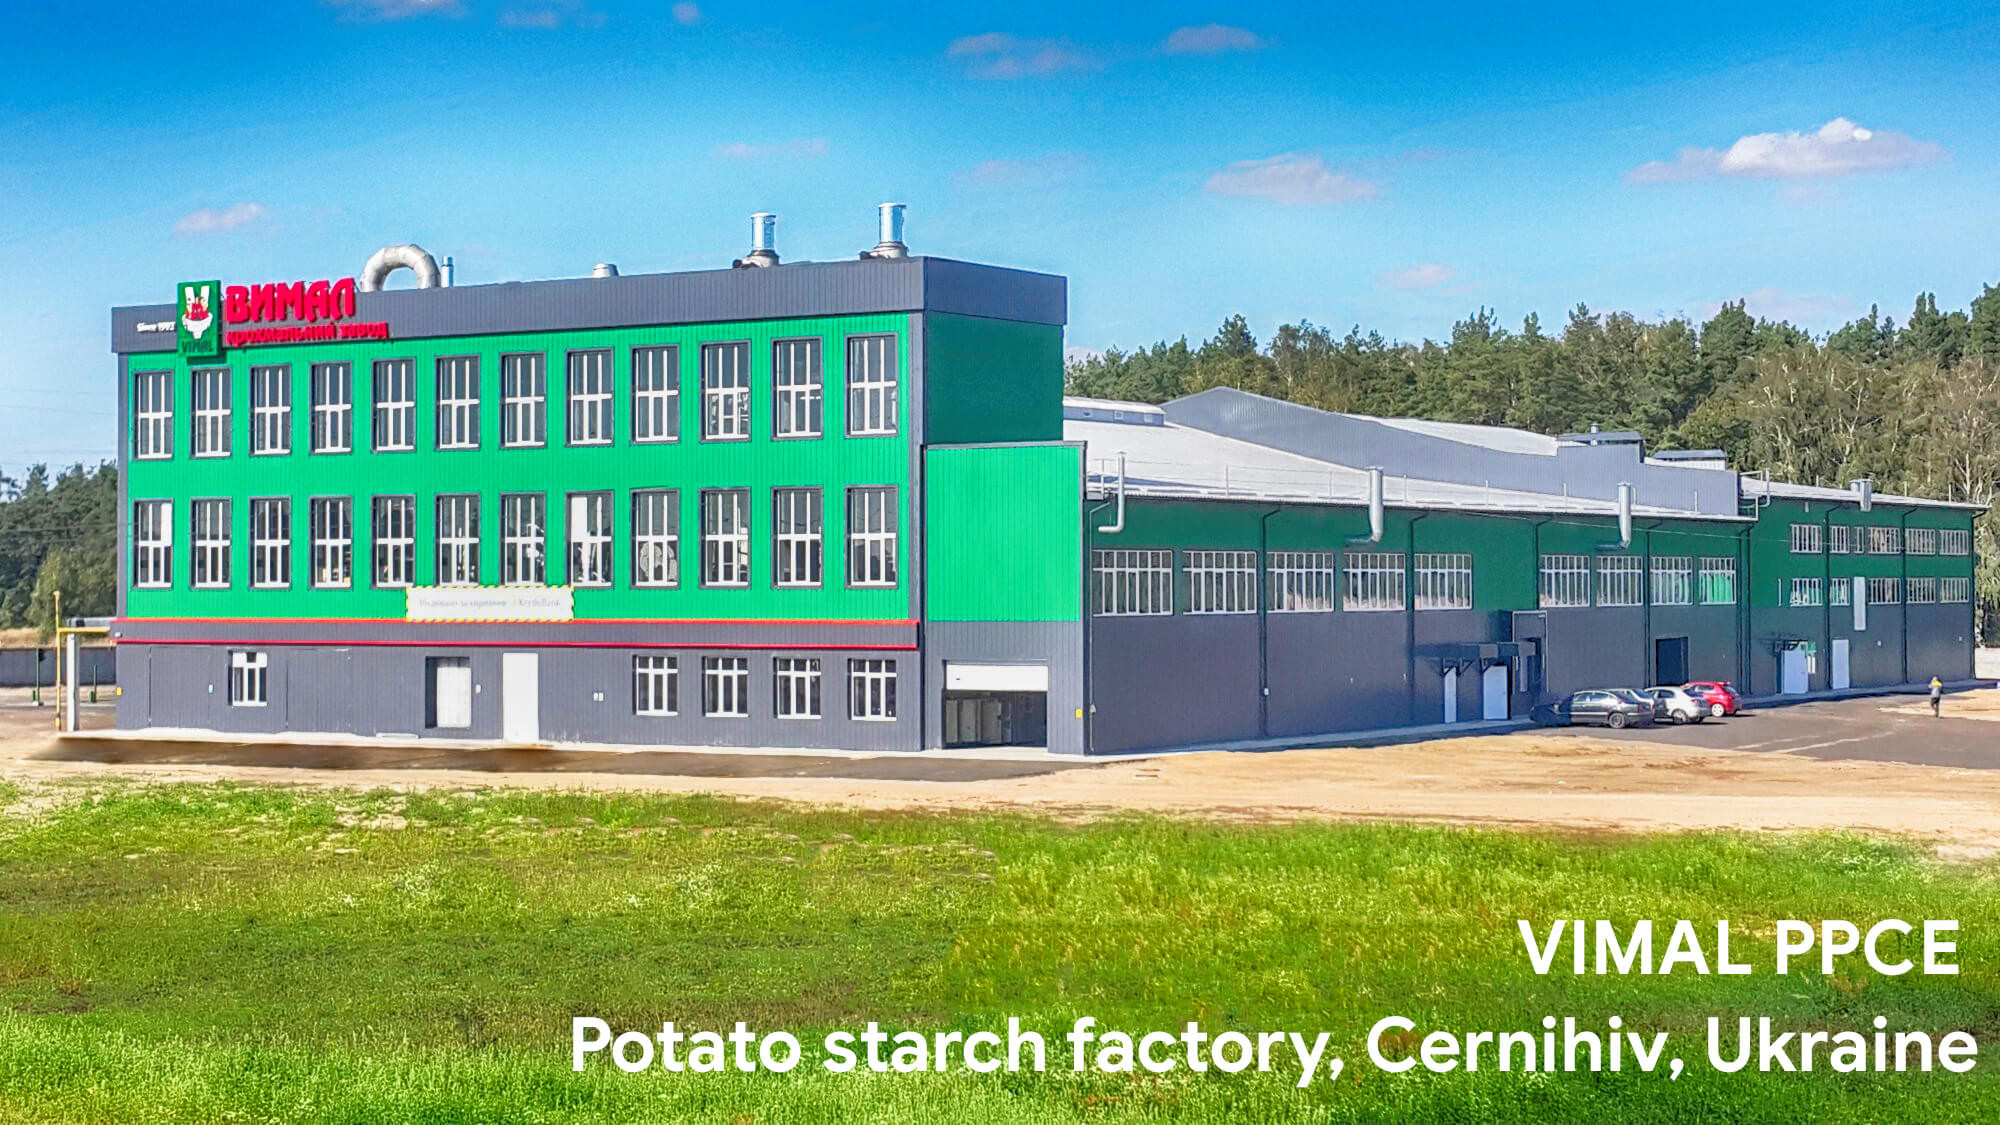 VIMAL's new starch factory